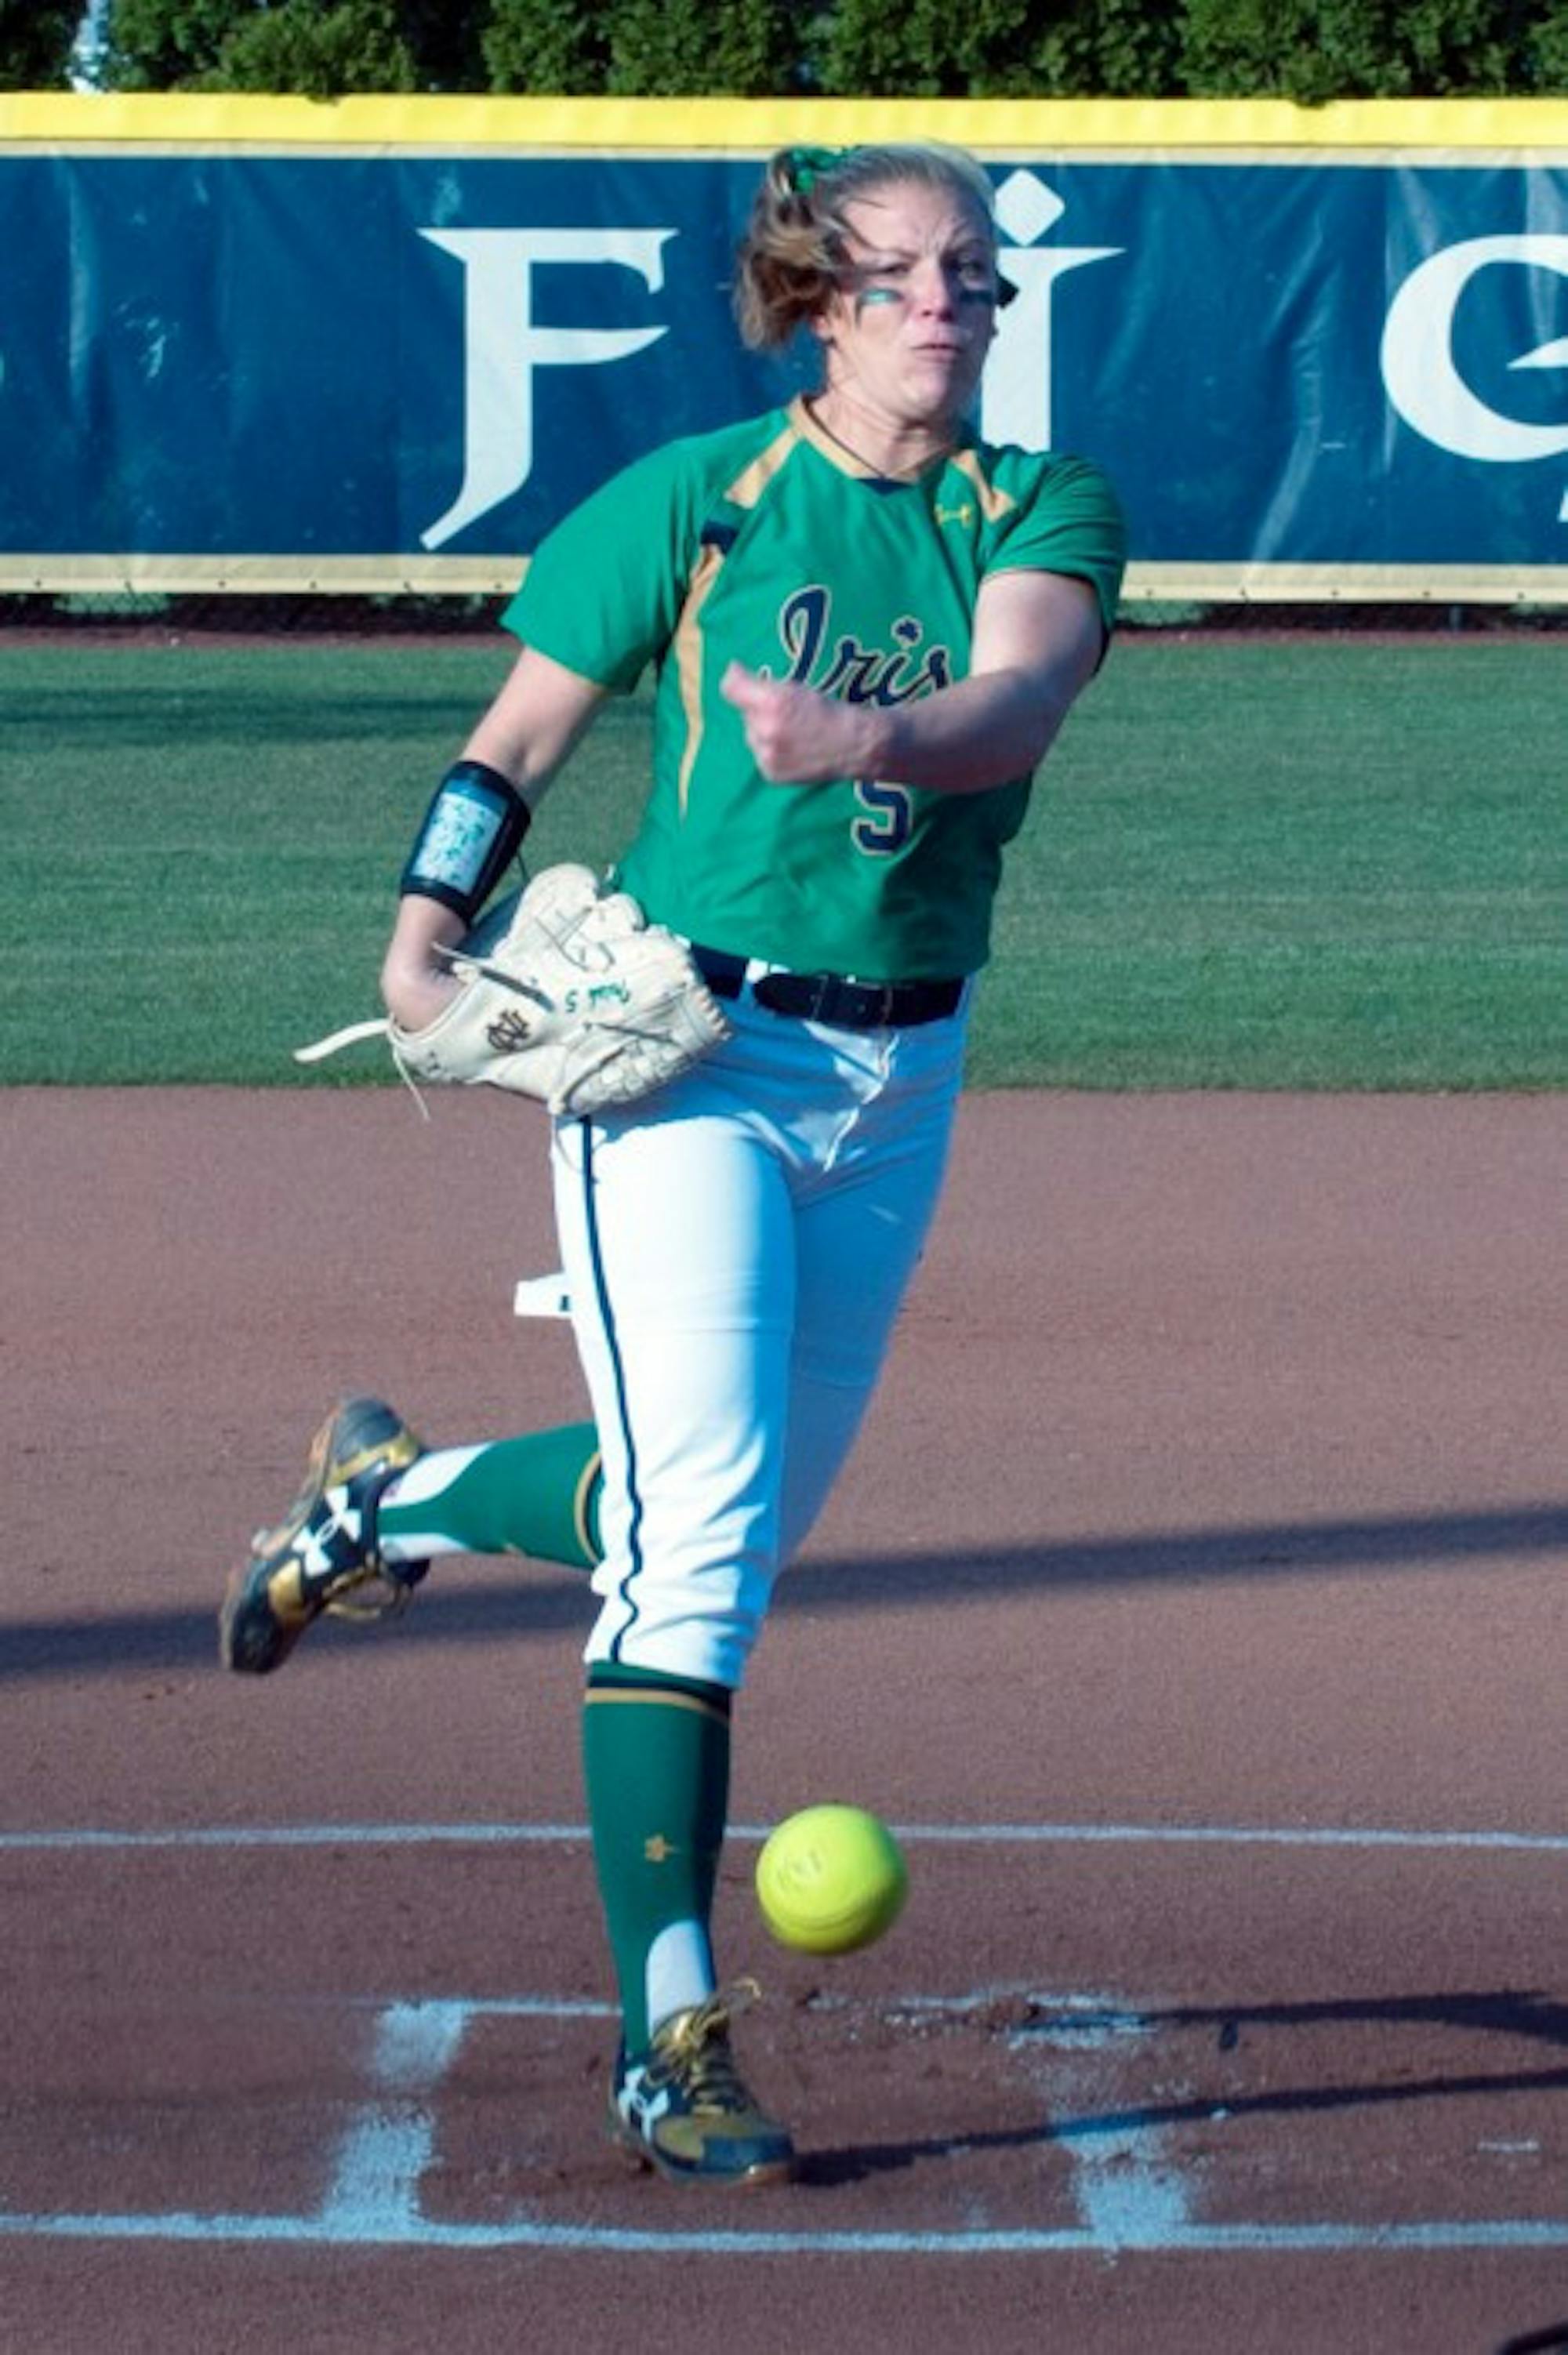 Irish senior Allie Rhodes delivers a pitch during Notre Dame’s 5-0 victory over Butler on Thursday night at Melissa Cook Stadium.